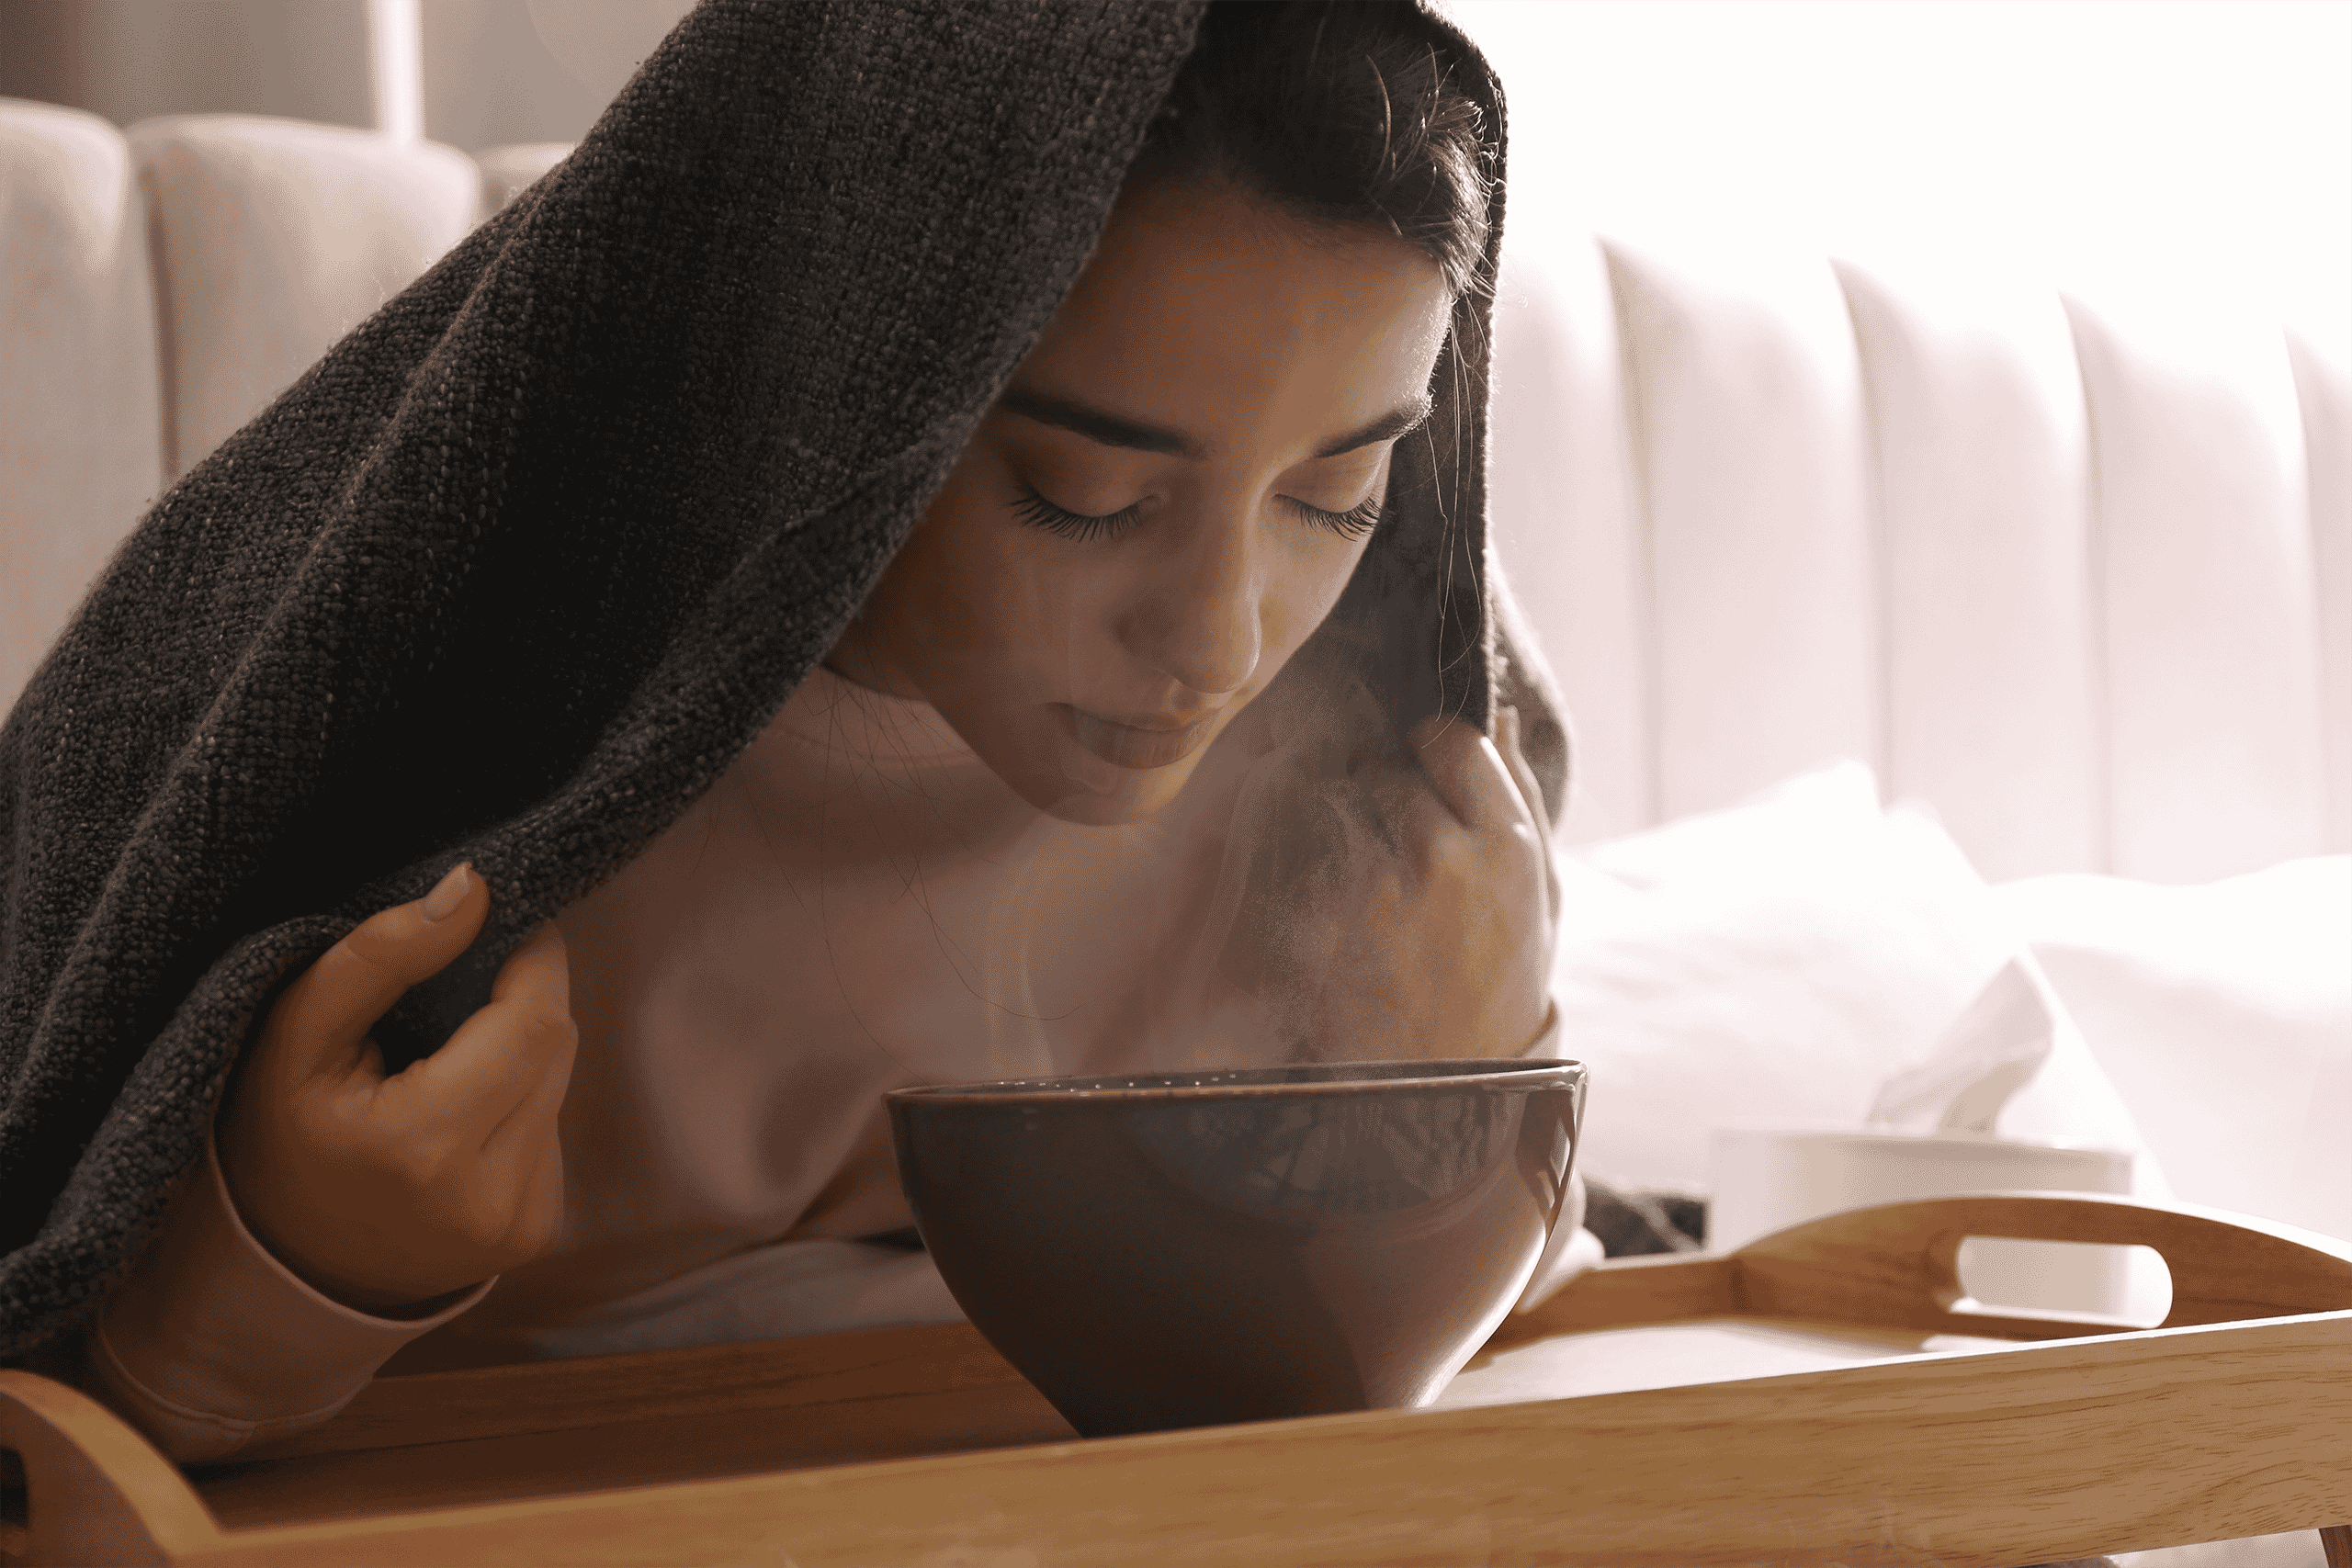 Woman with a towel over her head and face over a bowl of hot water, inhaling the steam.